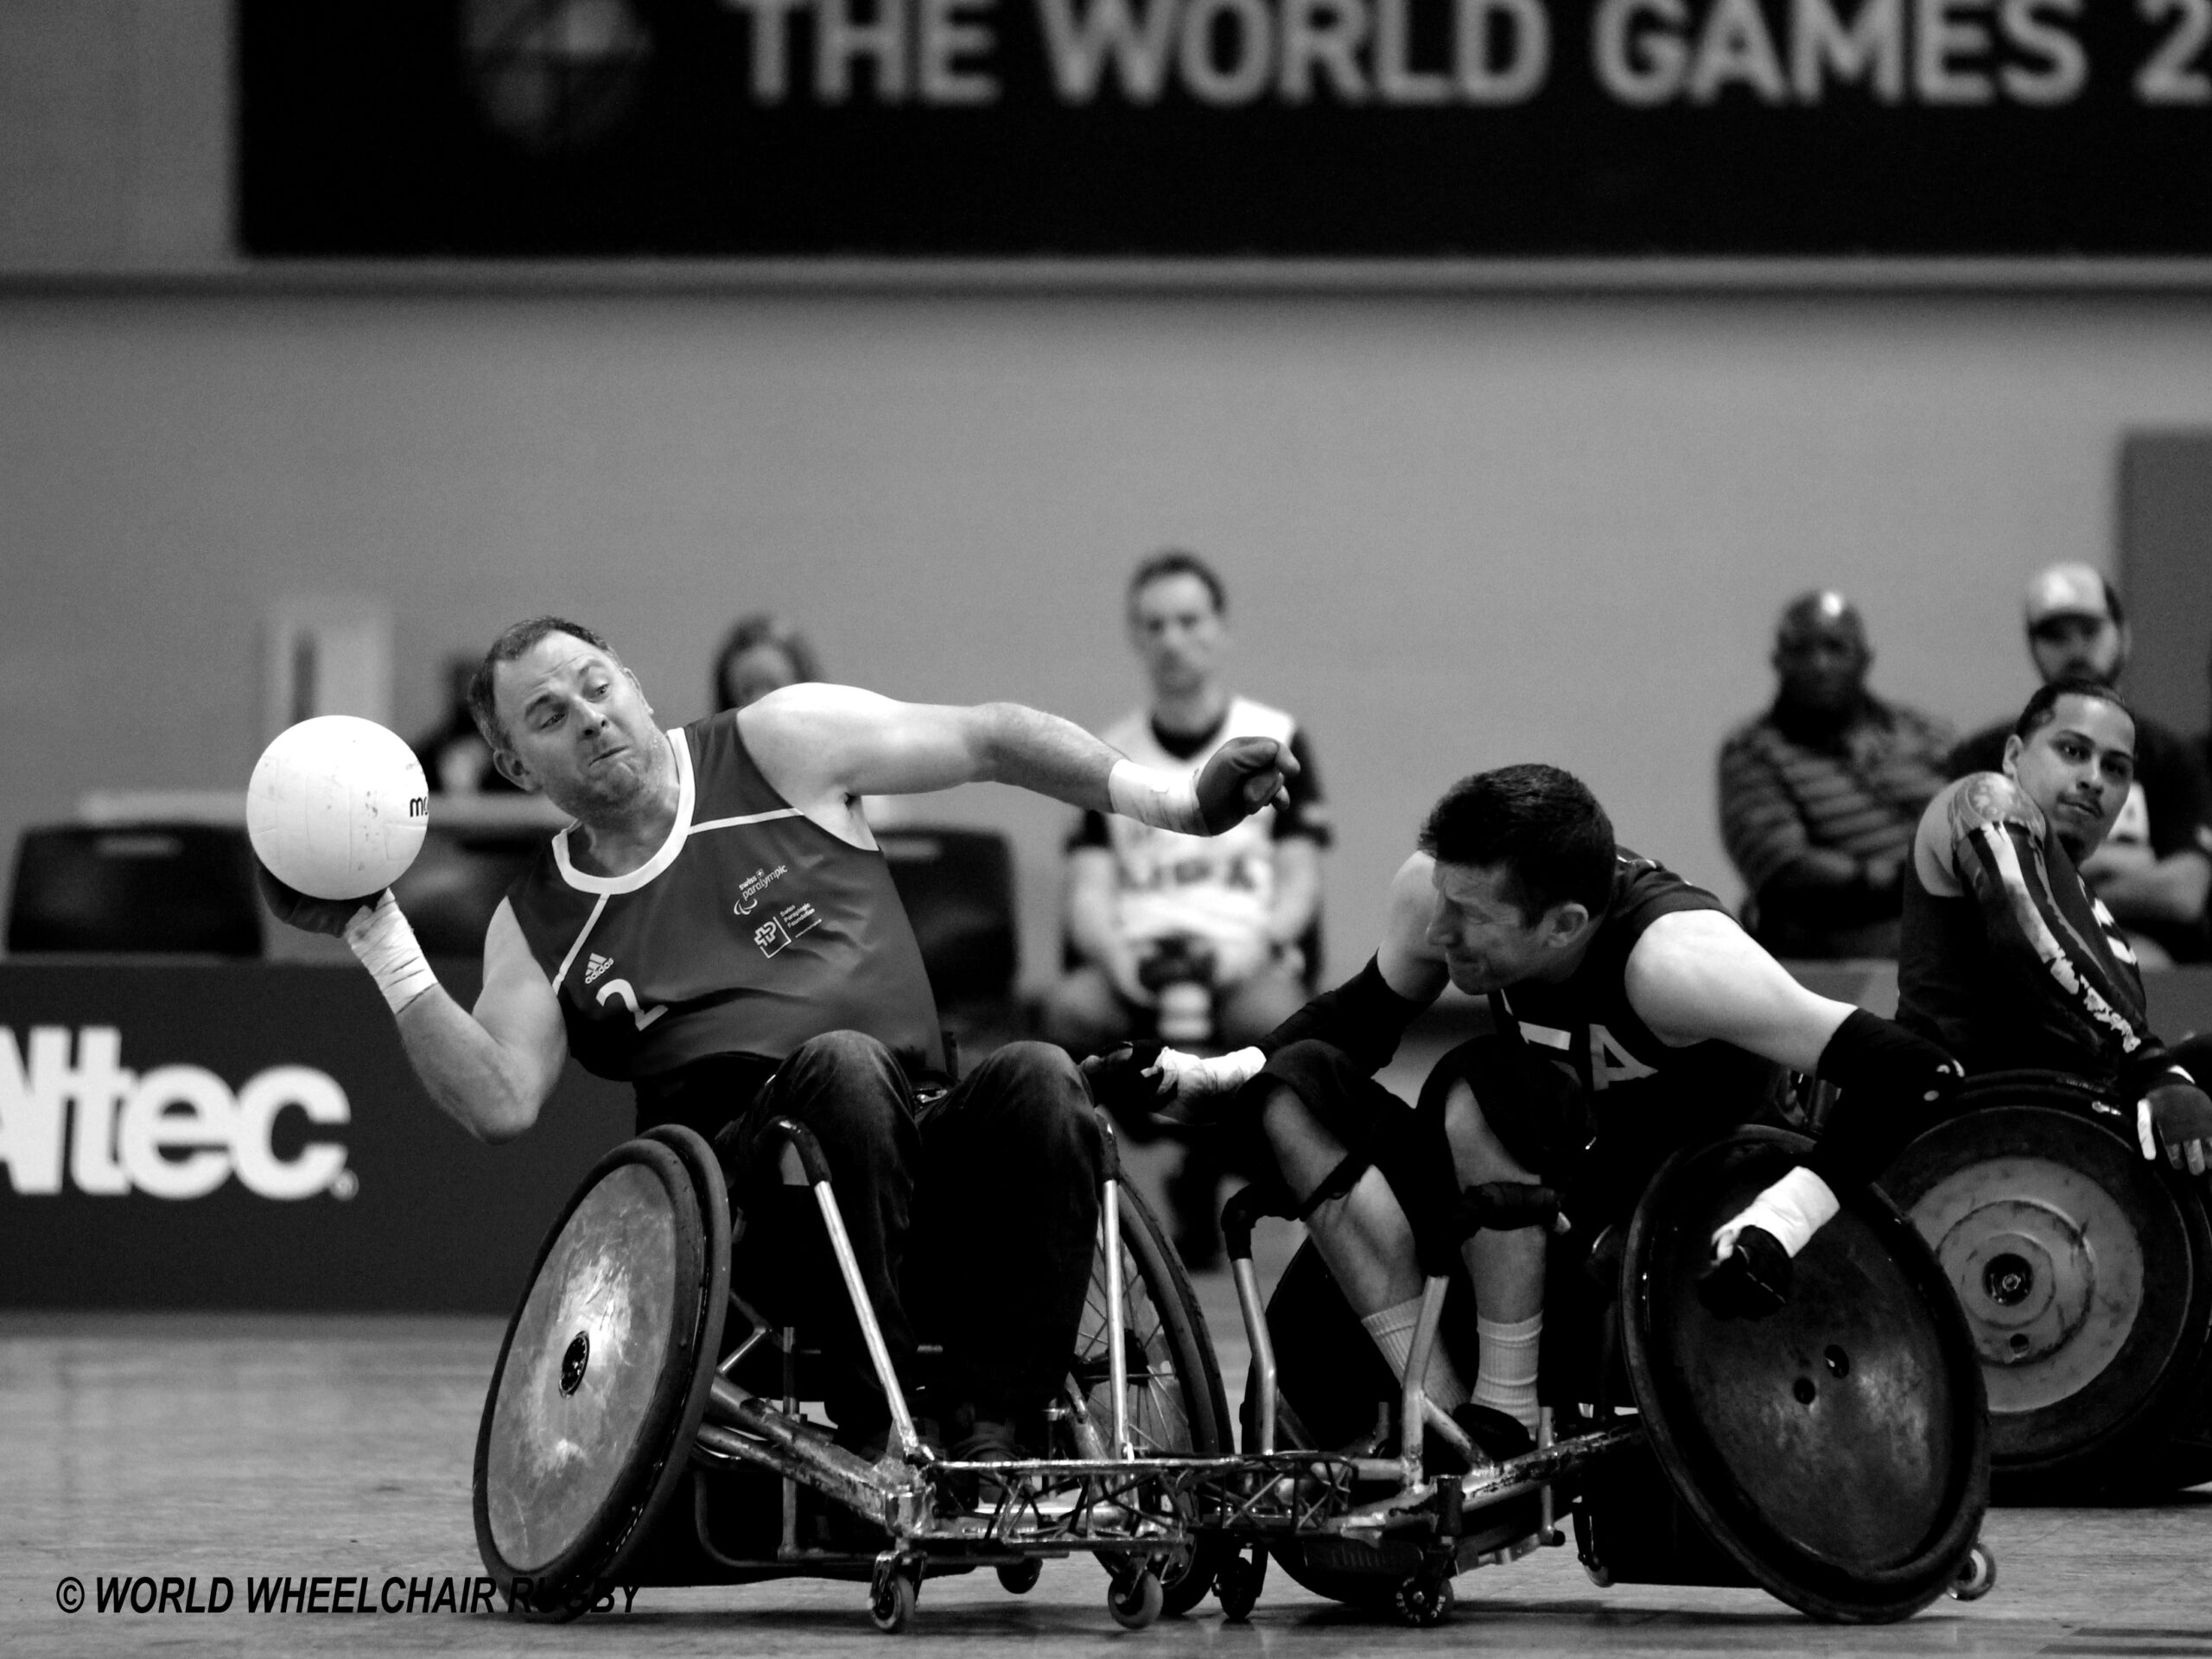 WWR is proud to announce the inclusion of Wheelchair Rugby at The World Games 2025 in Chengdu, China